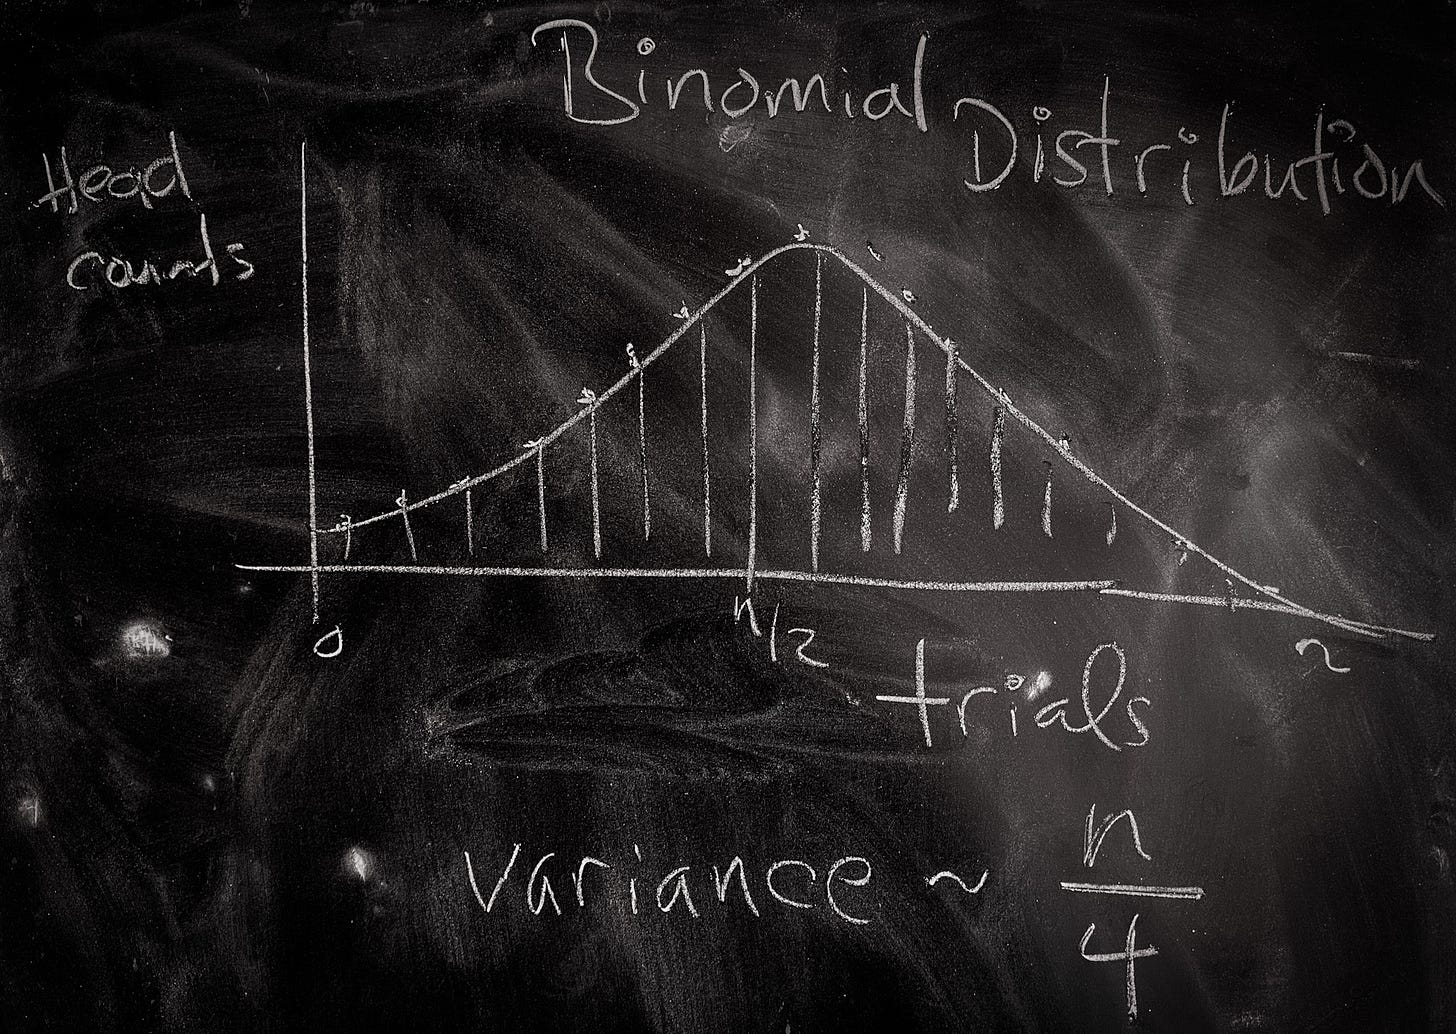 A sketched plot of the binomial distribution is shown.